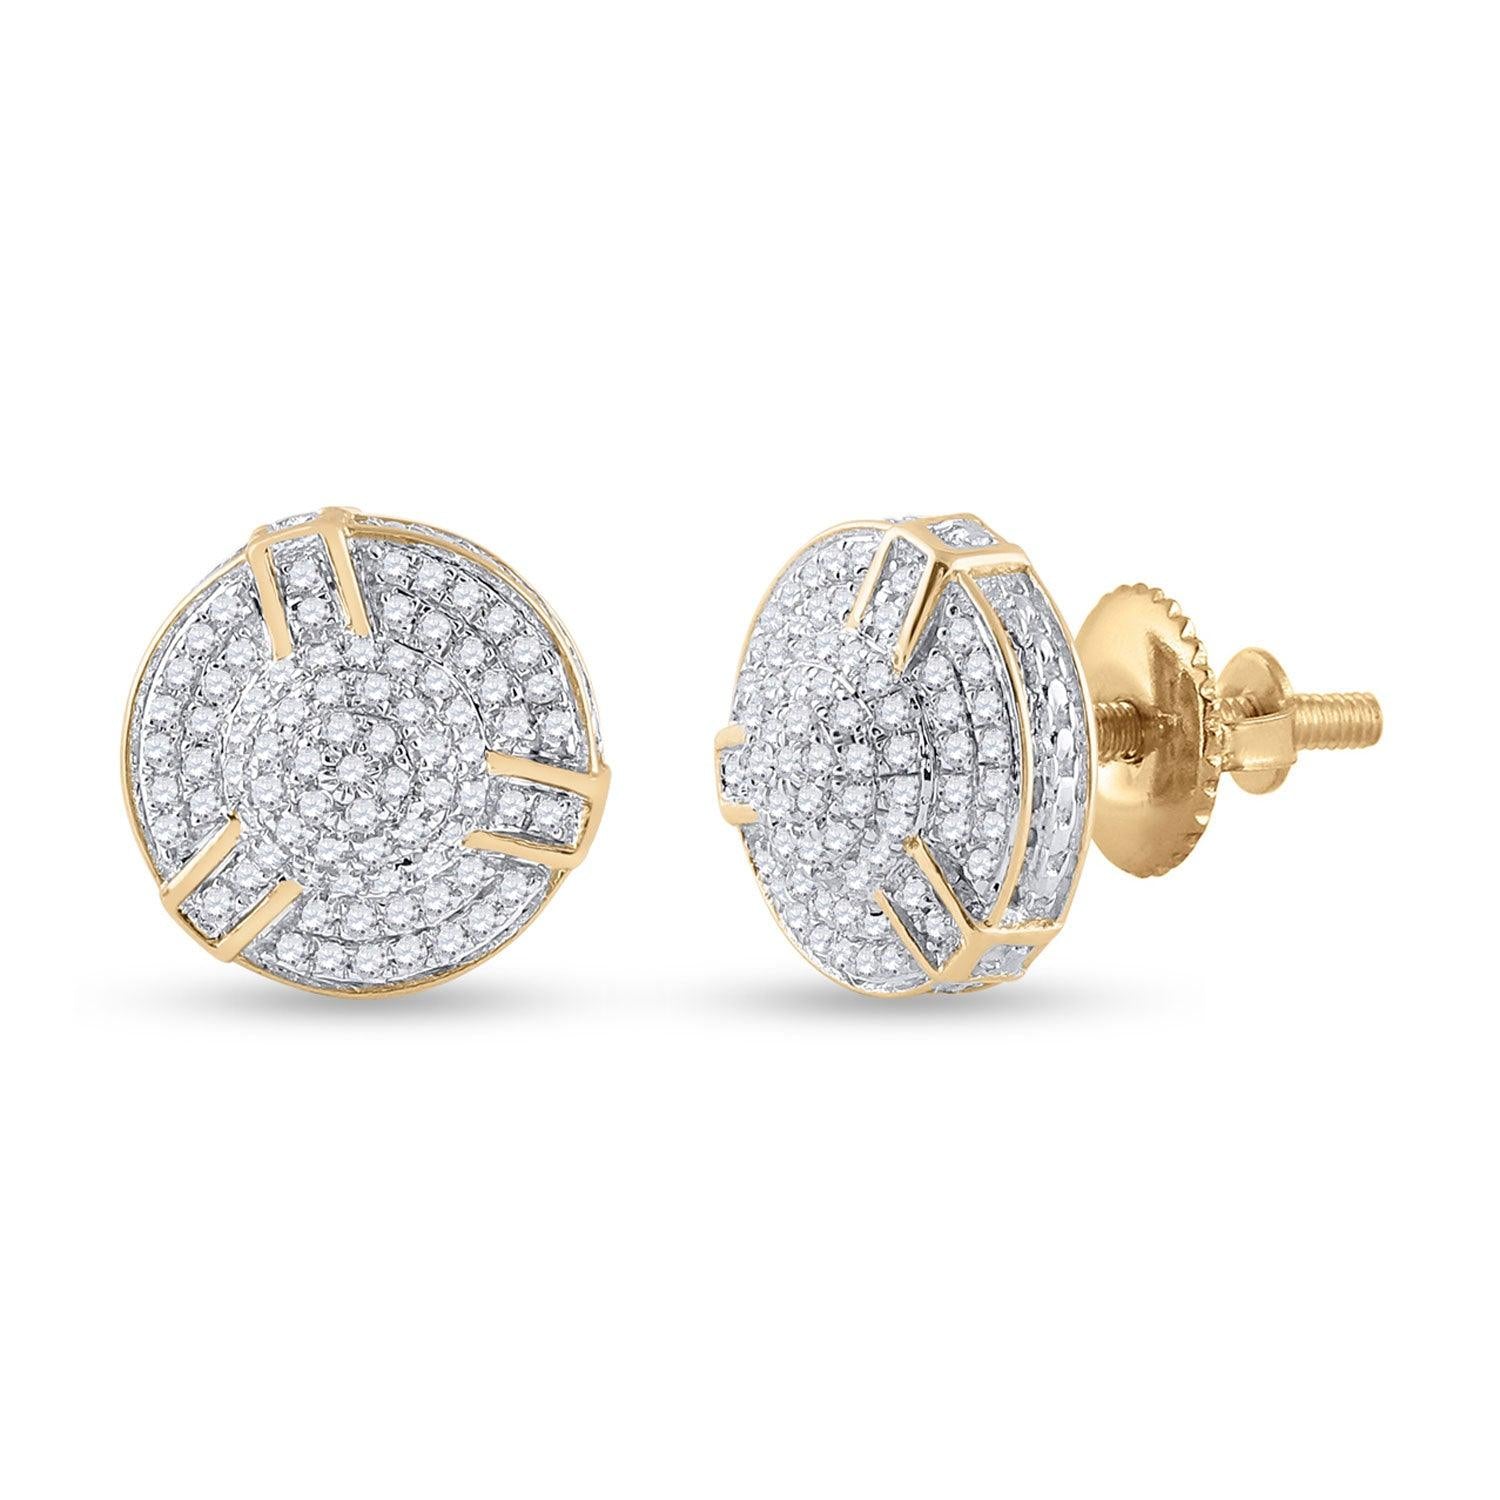 10kt Yellow Gold Mens Round Diamond Cluster Earrings 1/2 Cttw - Gold Heart Group Jewelers